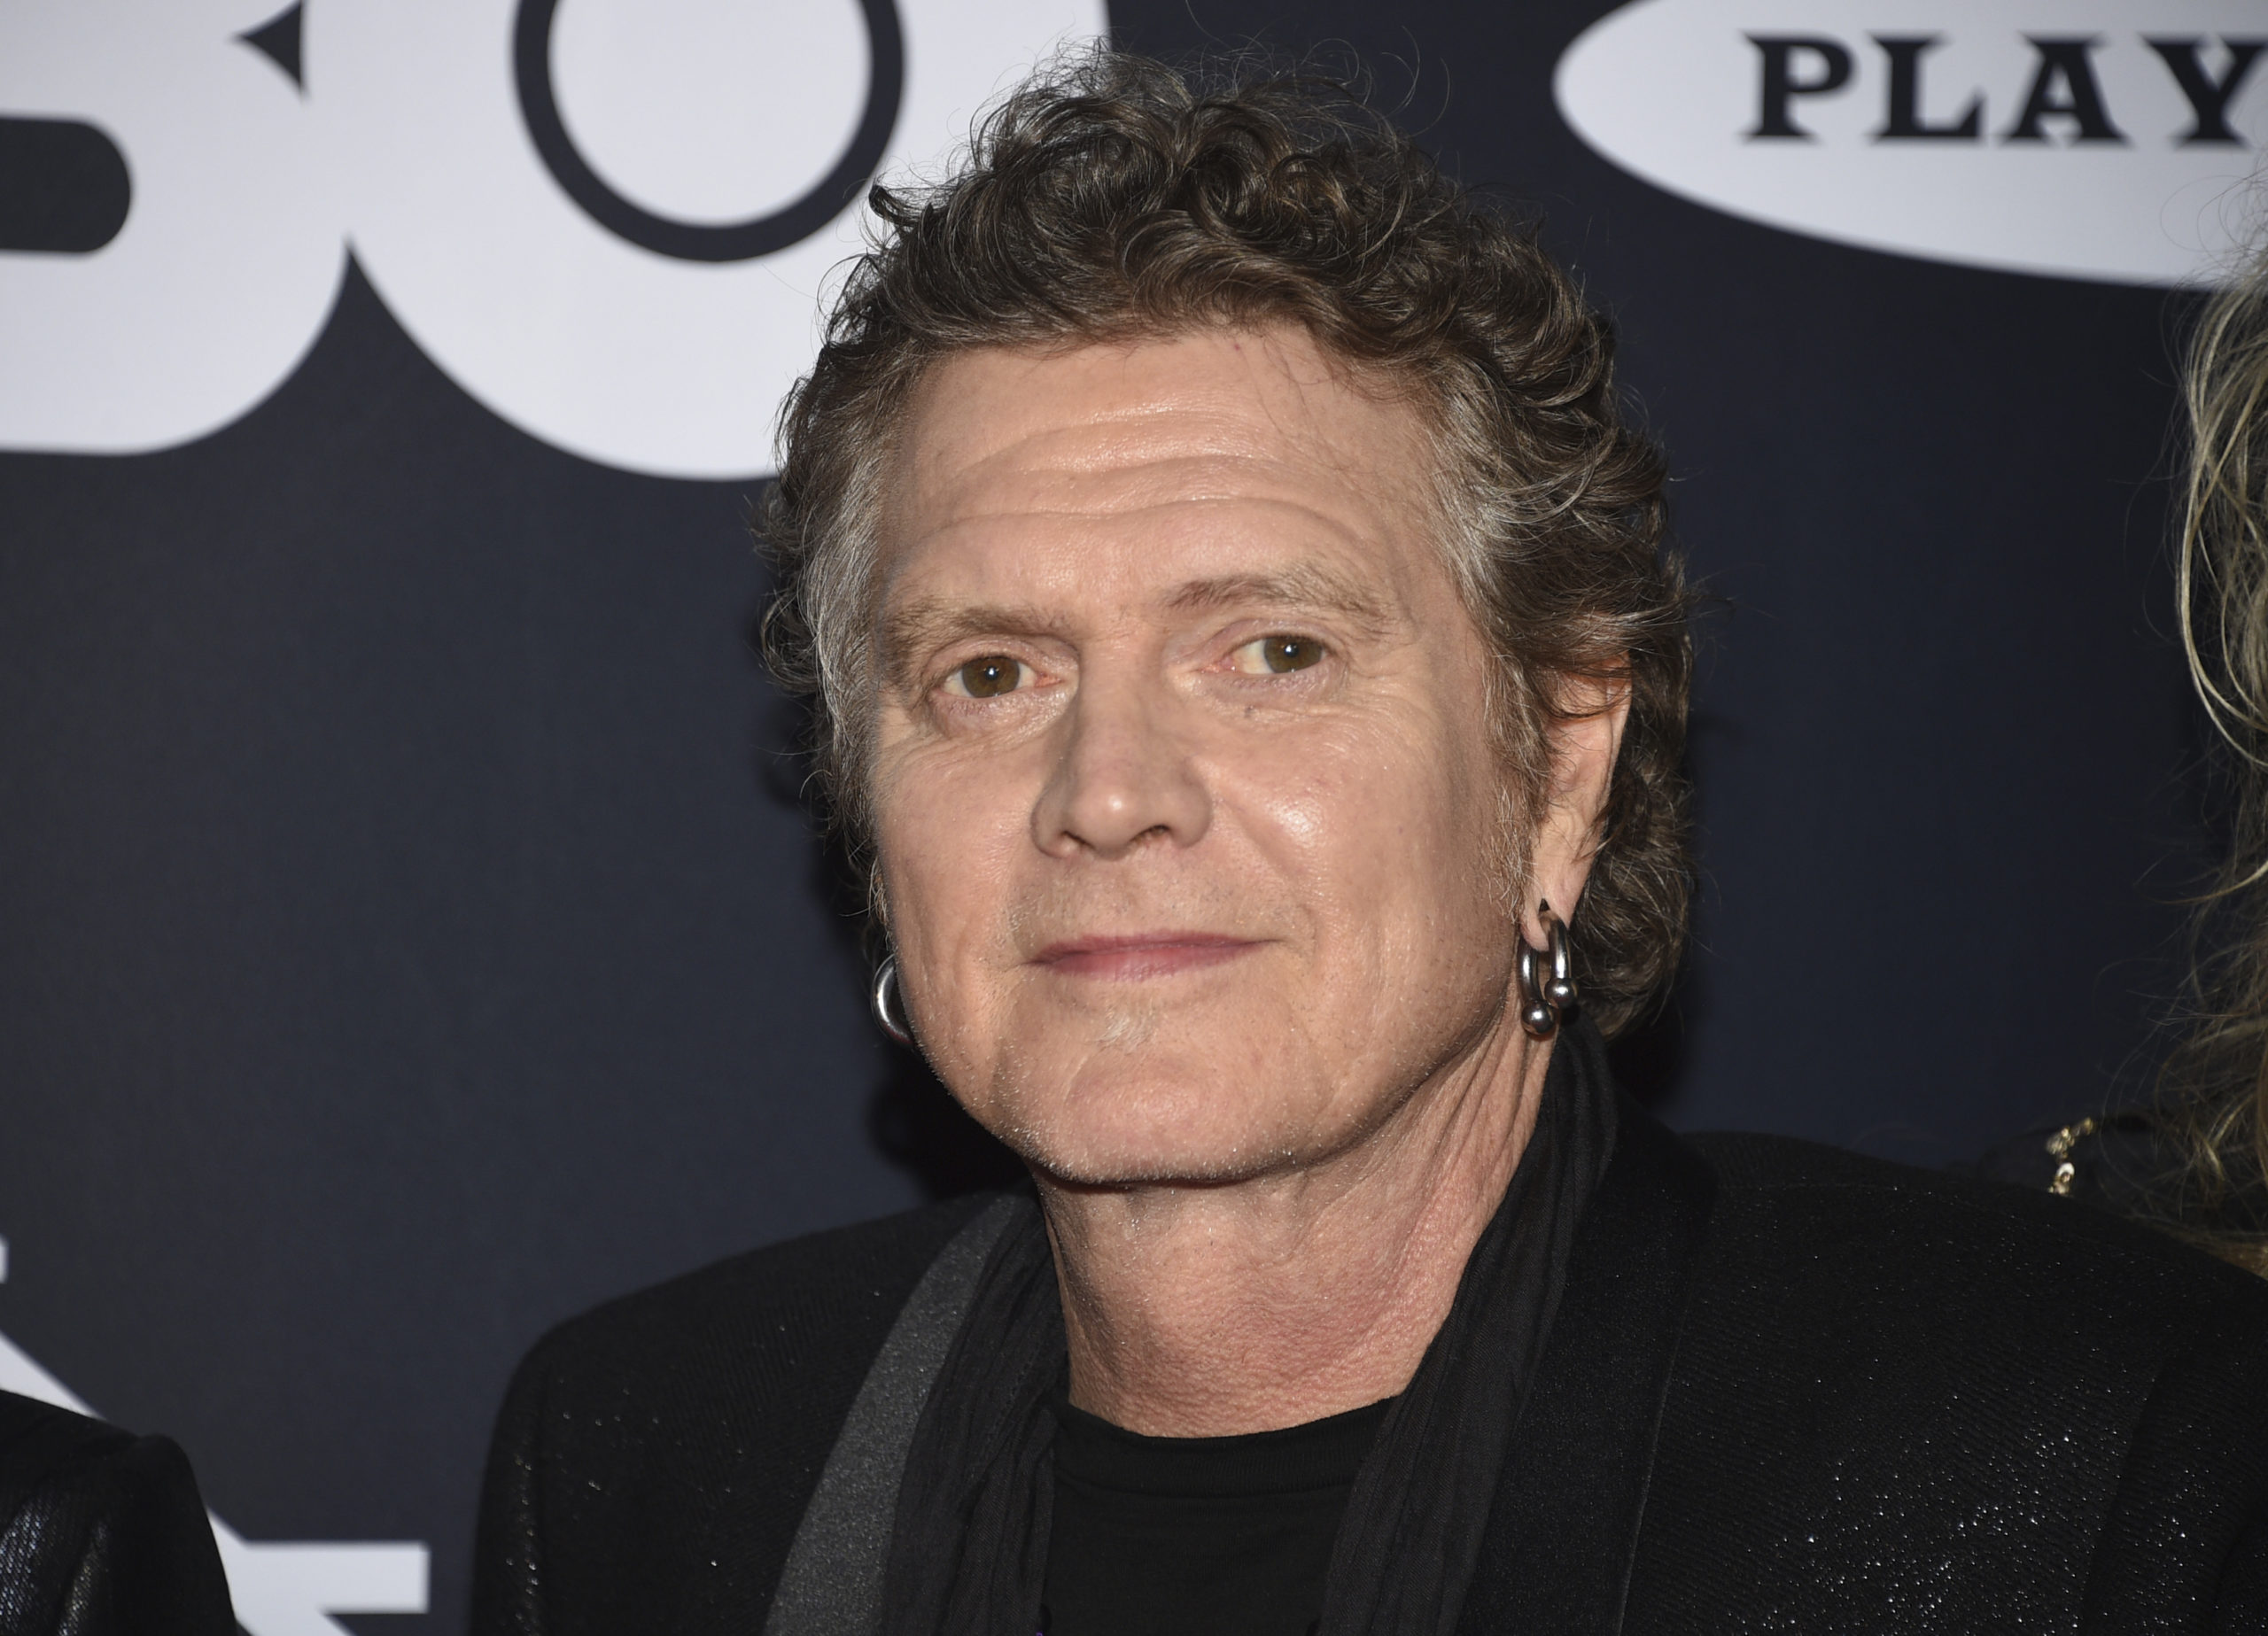 Rick Allen of Def Leppard arrives at the Rock & Roll Hall of Fame induction ceremony at the Barclays Center in New York City on March 29, 2019.